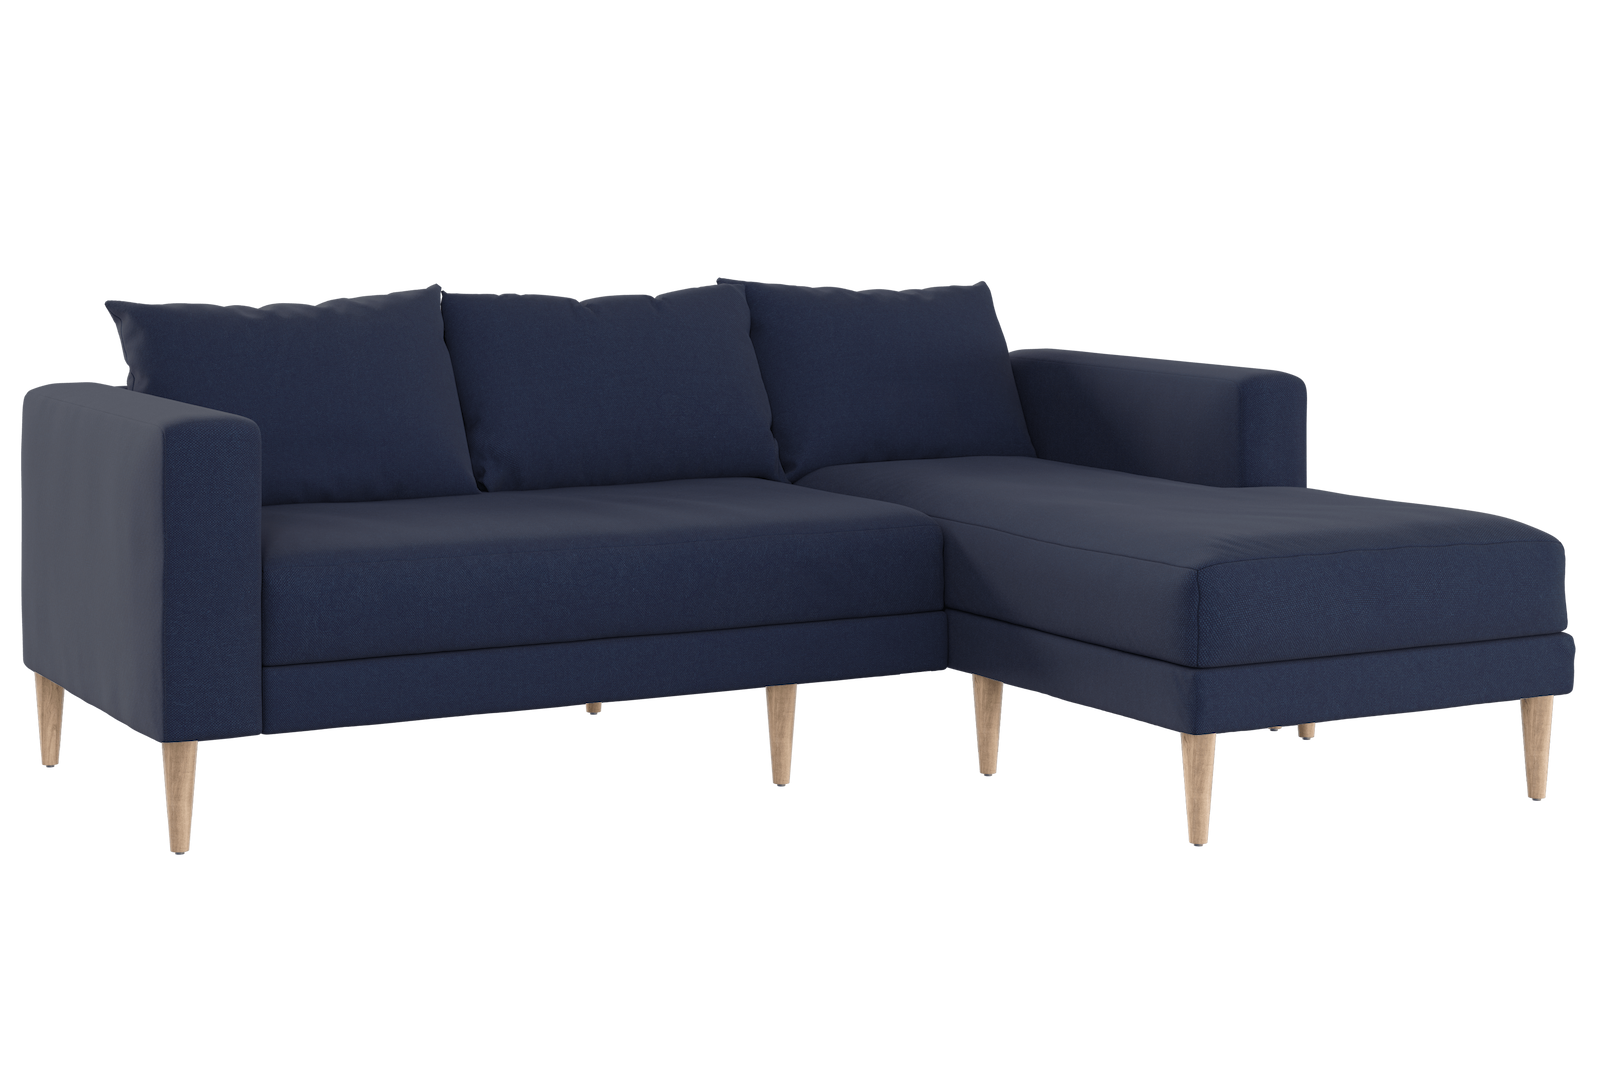 The Essential Sectional in Upcycled Poly